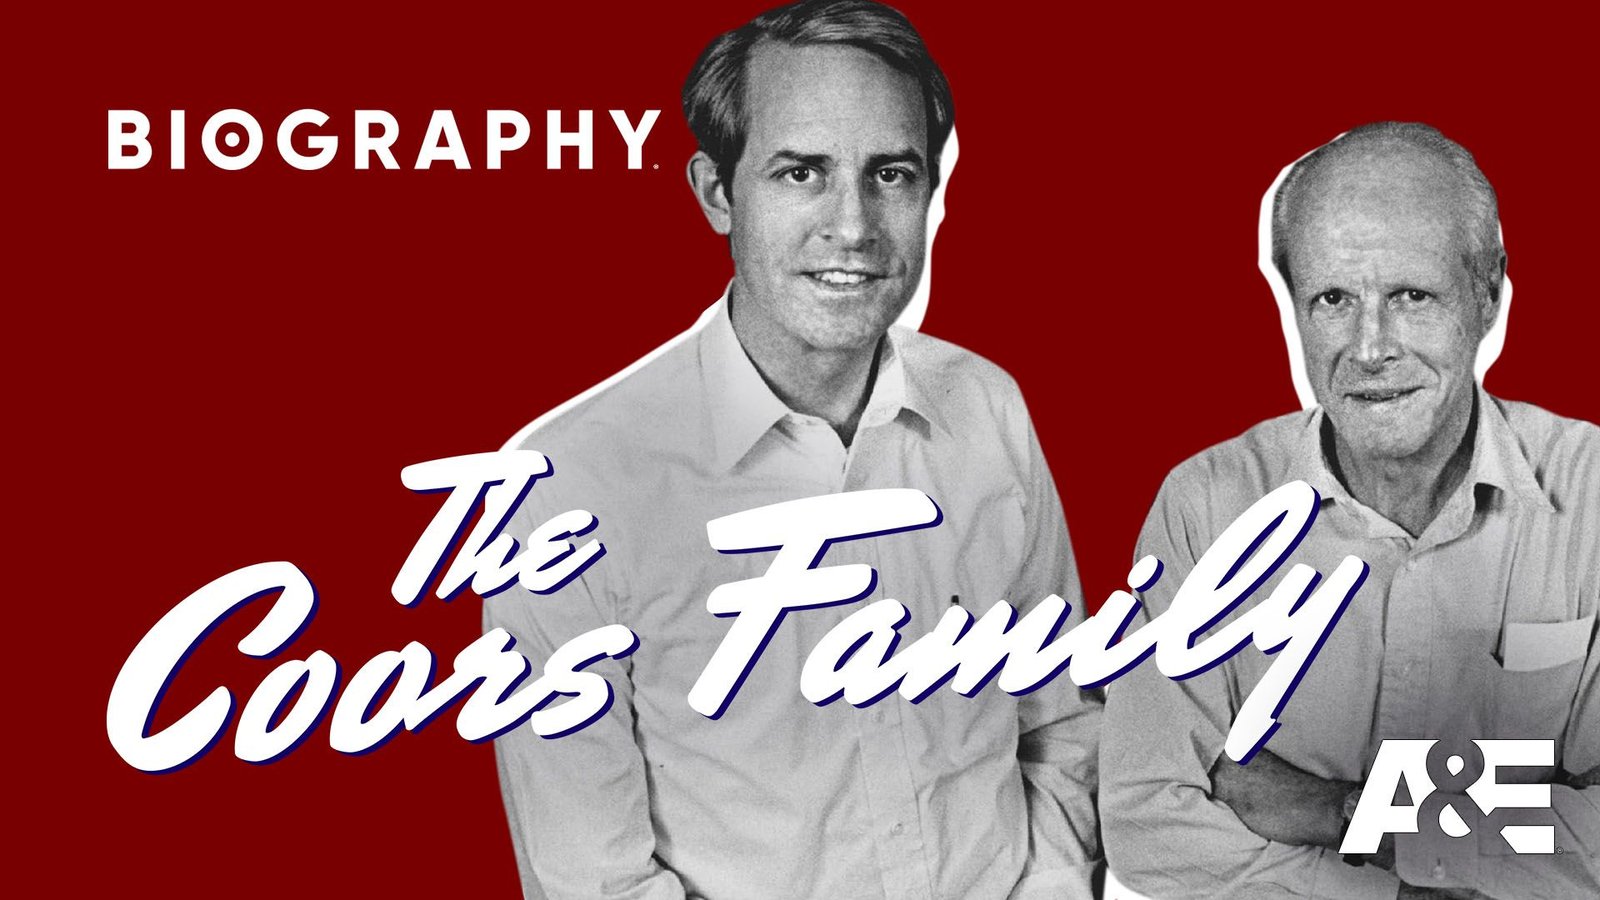 The Coors Family